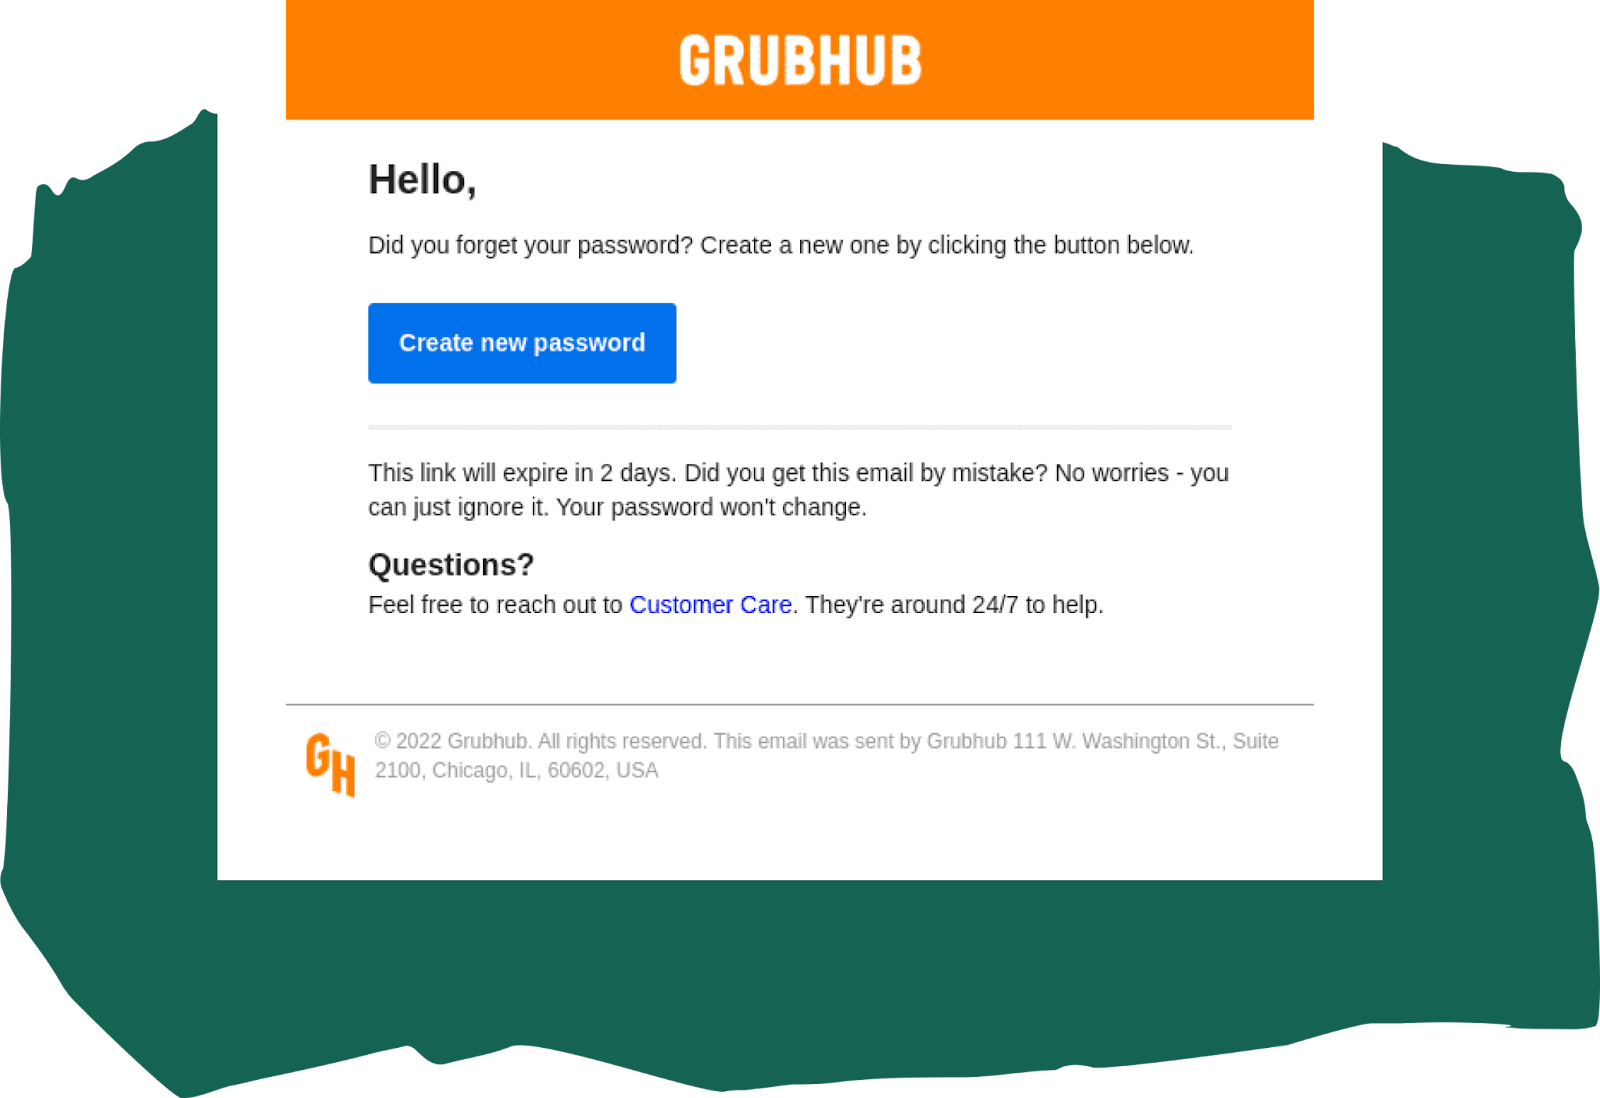 Grubhub create a new password email